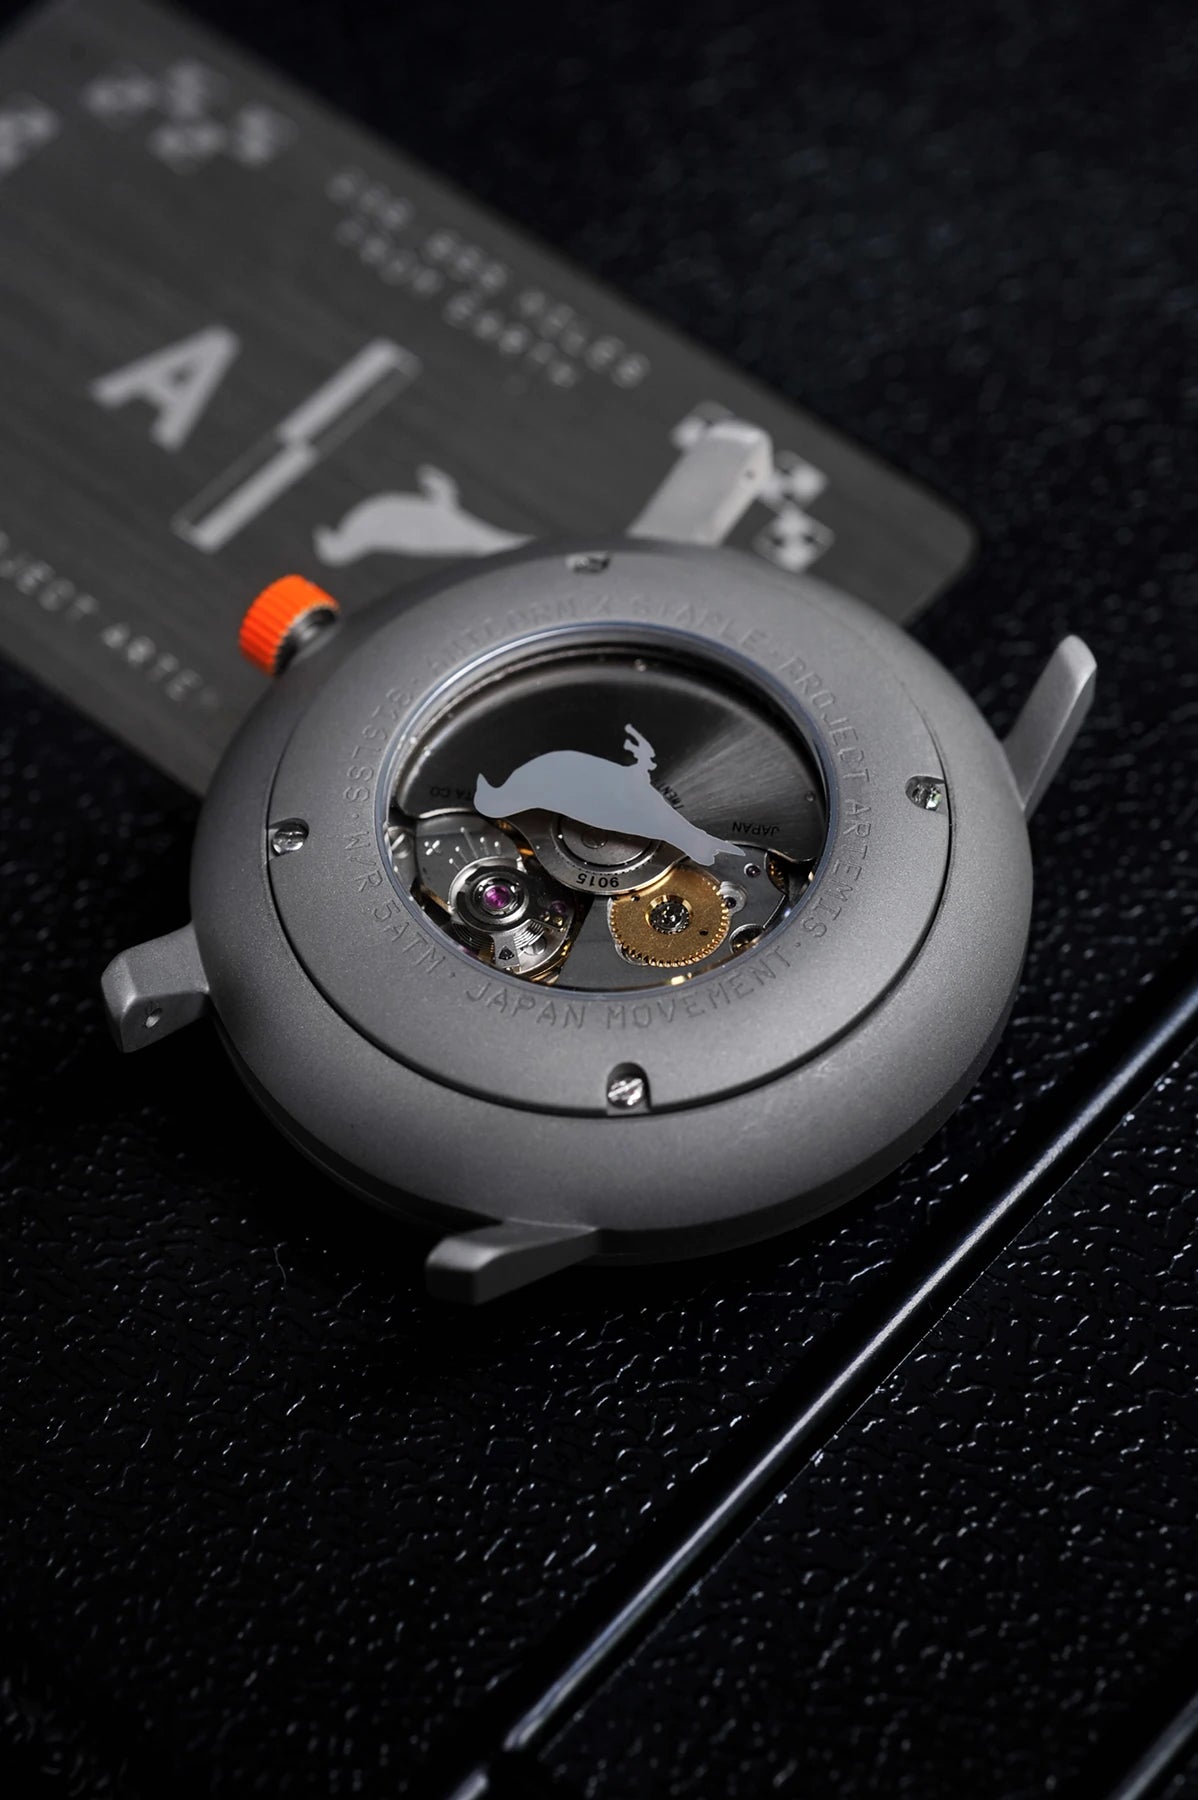 Artemis Time has a clean, minimal and sleek design, the gray color is inspired by the moon rock, with the orange highlights on the dial and crown recalling the “International Orange” applied on the spacesuit, back case